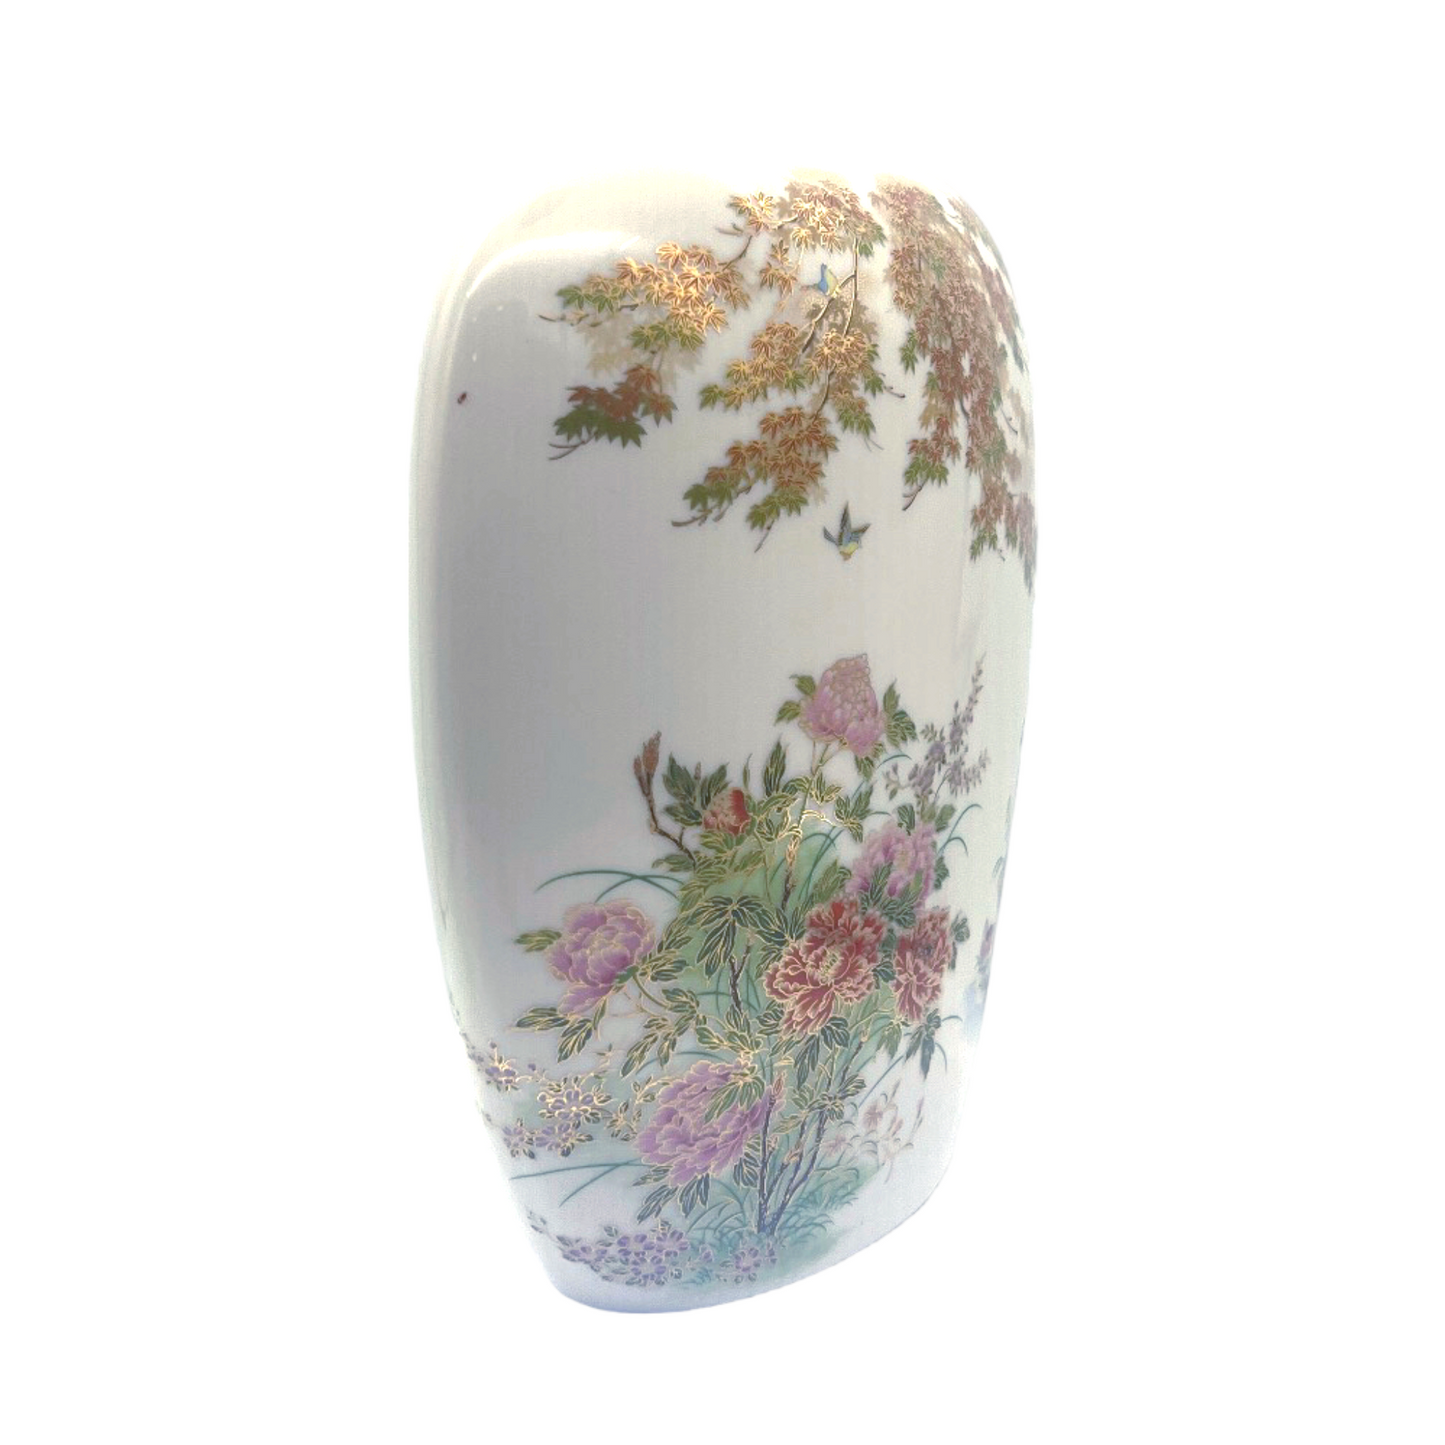 Japanese Pillow Vase - Porcelain - Hand Painted With Gold Leaf 9"